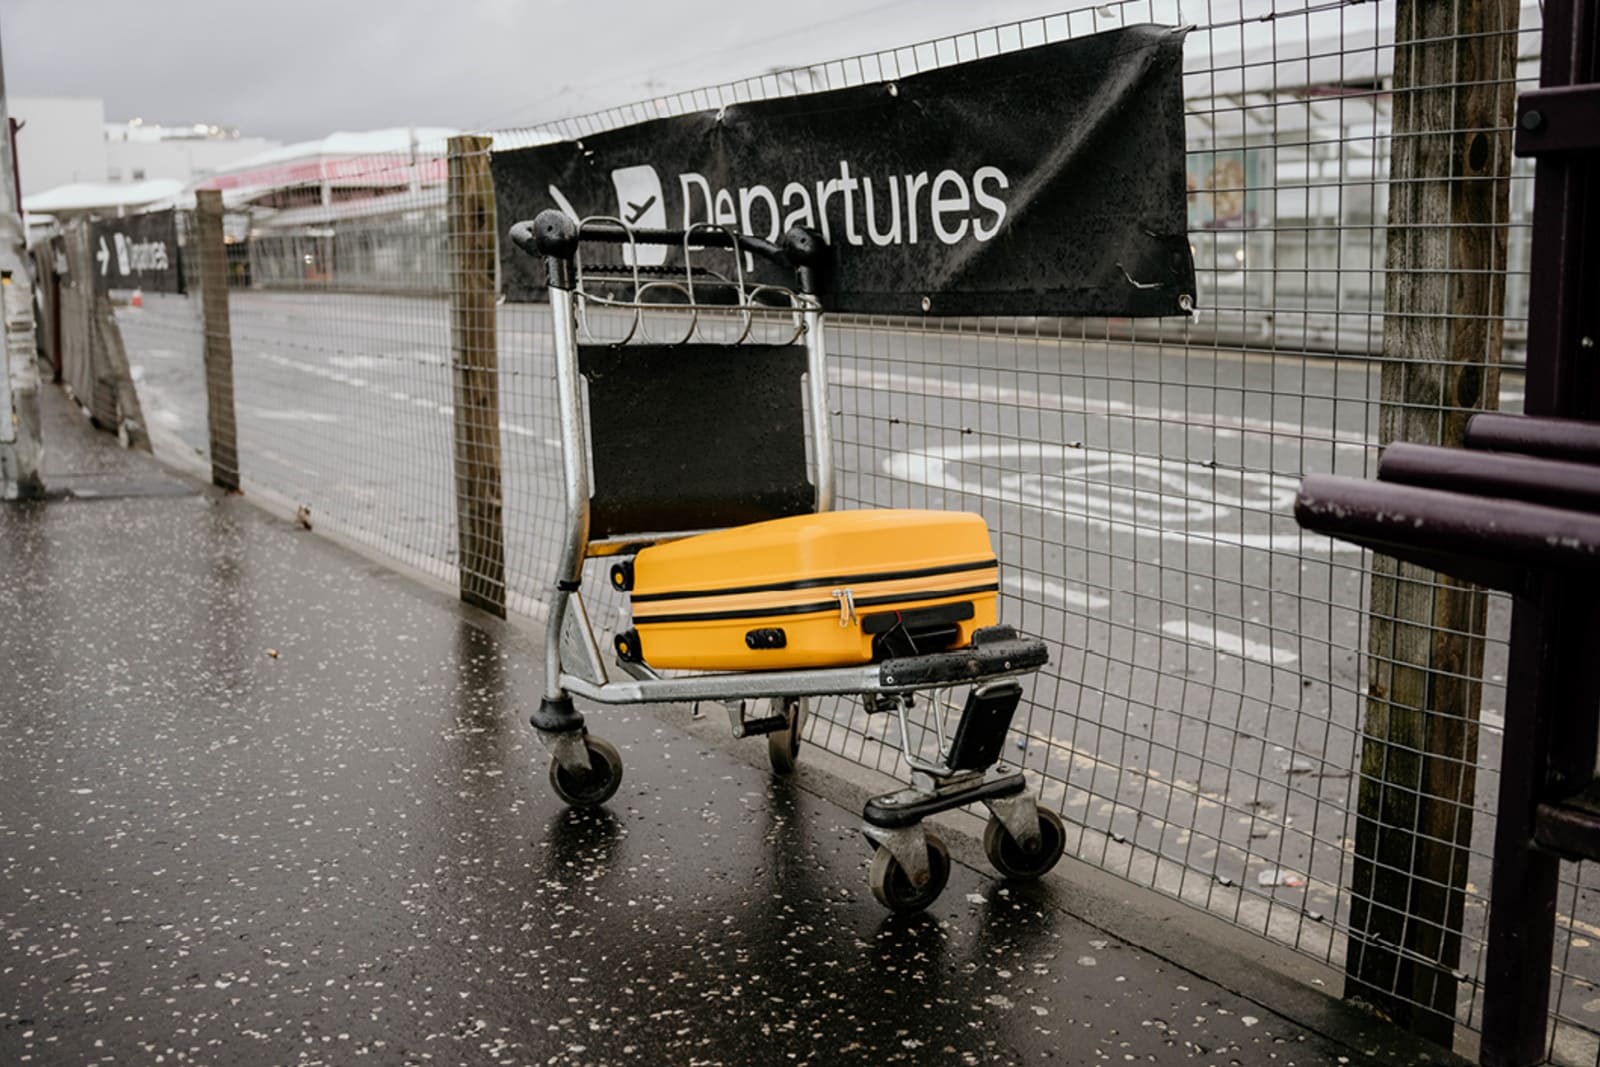 A lost bag of luggage on a luggage cart in the departures tarmac